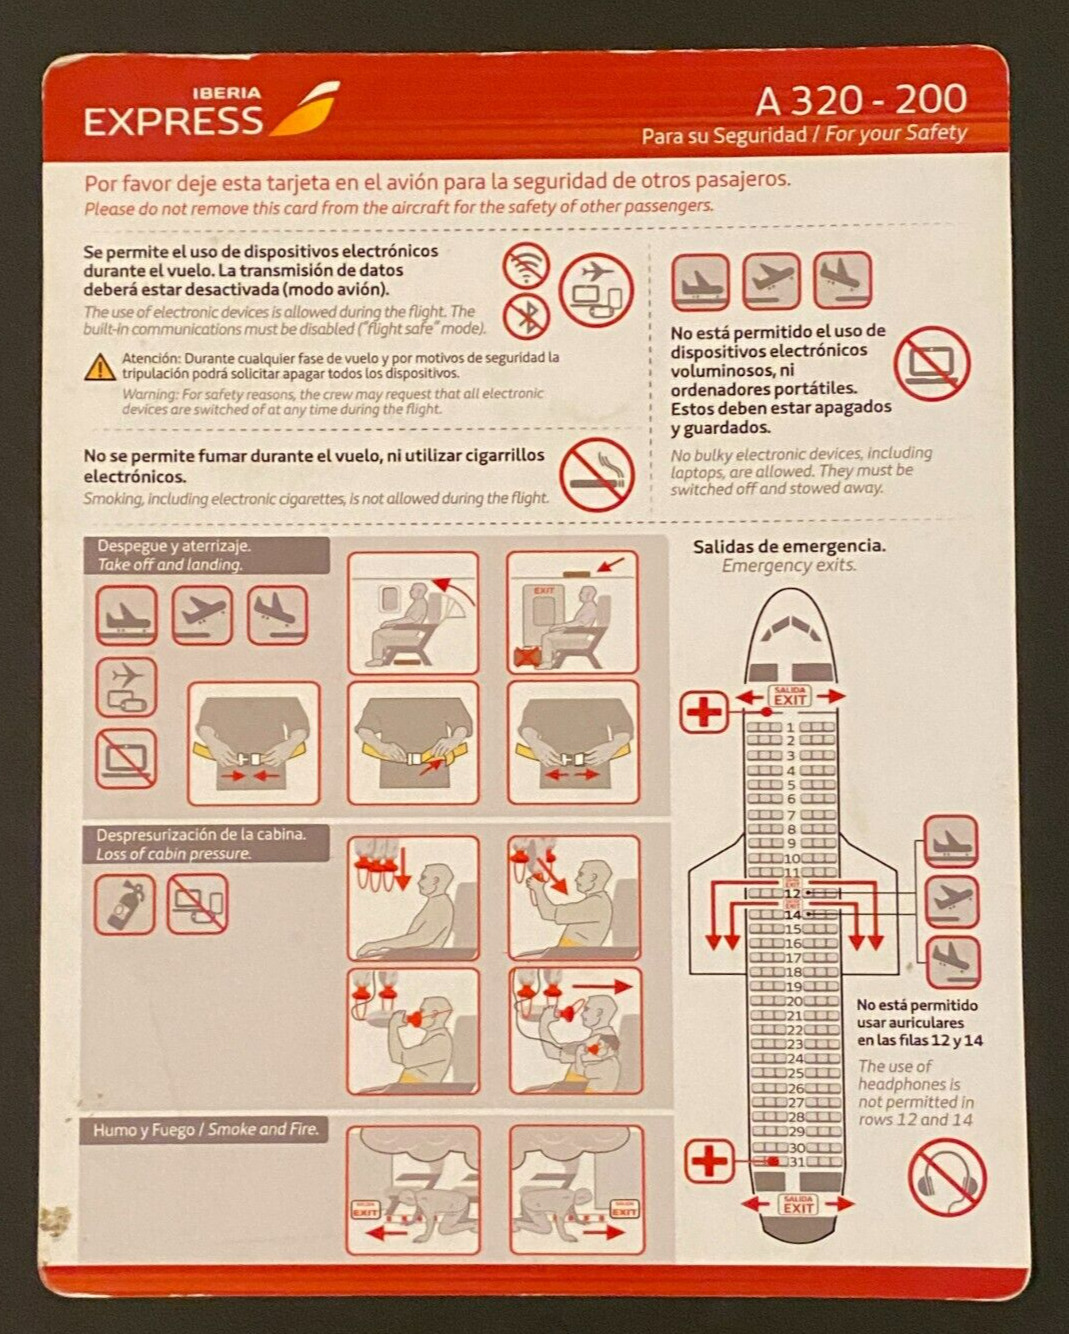 Iberia Express Airbus A320-200 Safety Card - MAR14